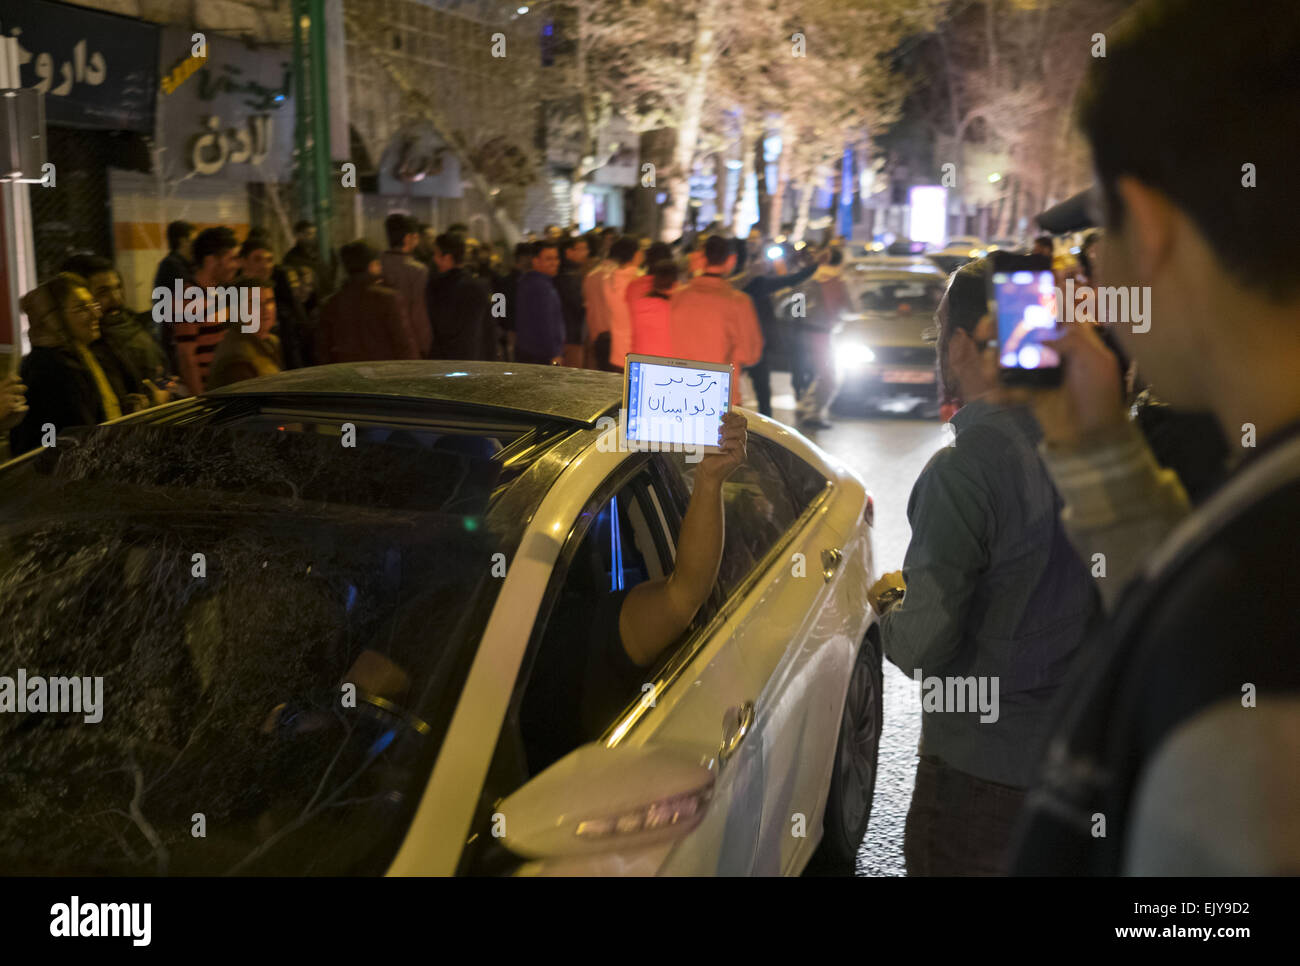 Tehran, Iran. 2nd Apr, 2015. April 3, 2015 - Tehran, Iran - An Iranian man holds a tablet with a Persian script that said, Down with concerns, as he celebrate after Iran's nuclear agreement with world powers in Lausanne, in northern Tehran.  Credit:  Morteza Nikoubazl/ZUMA Wire/Alamy Live News Stock Photo